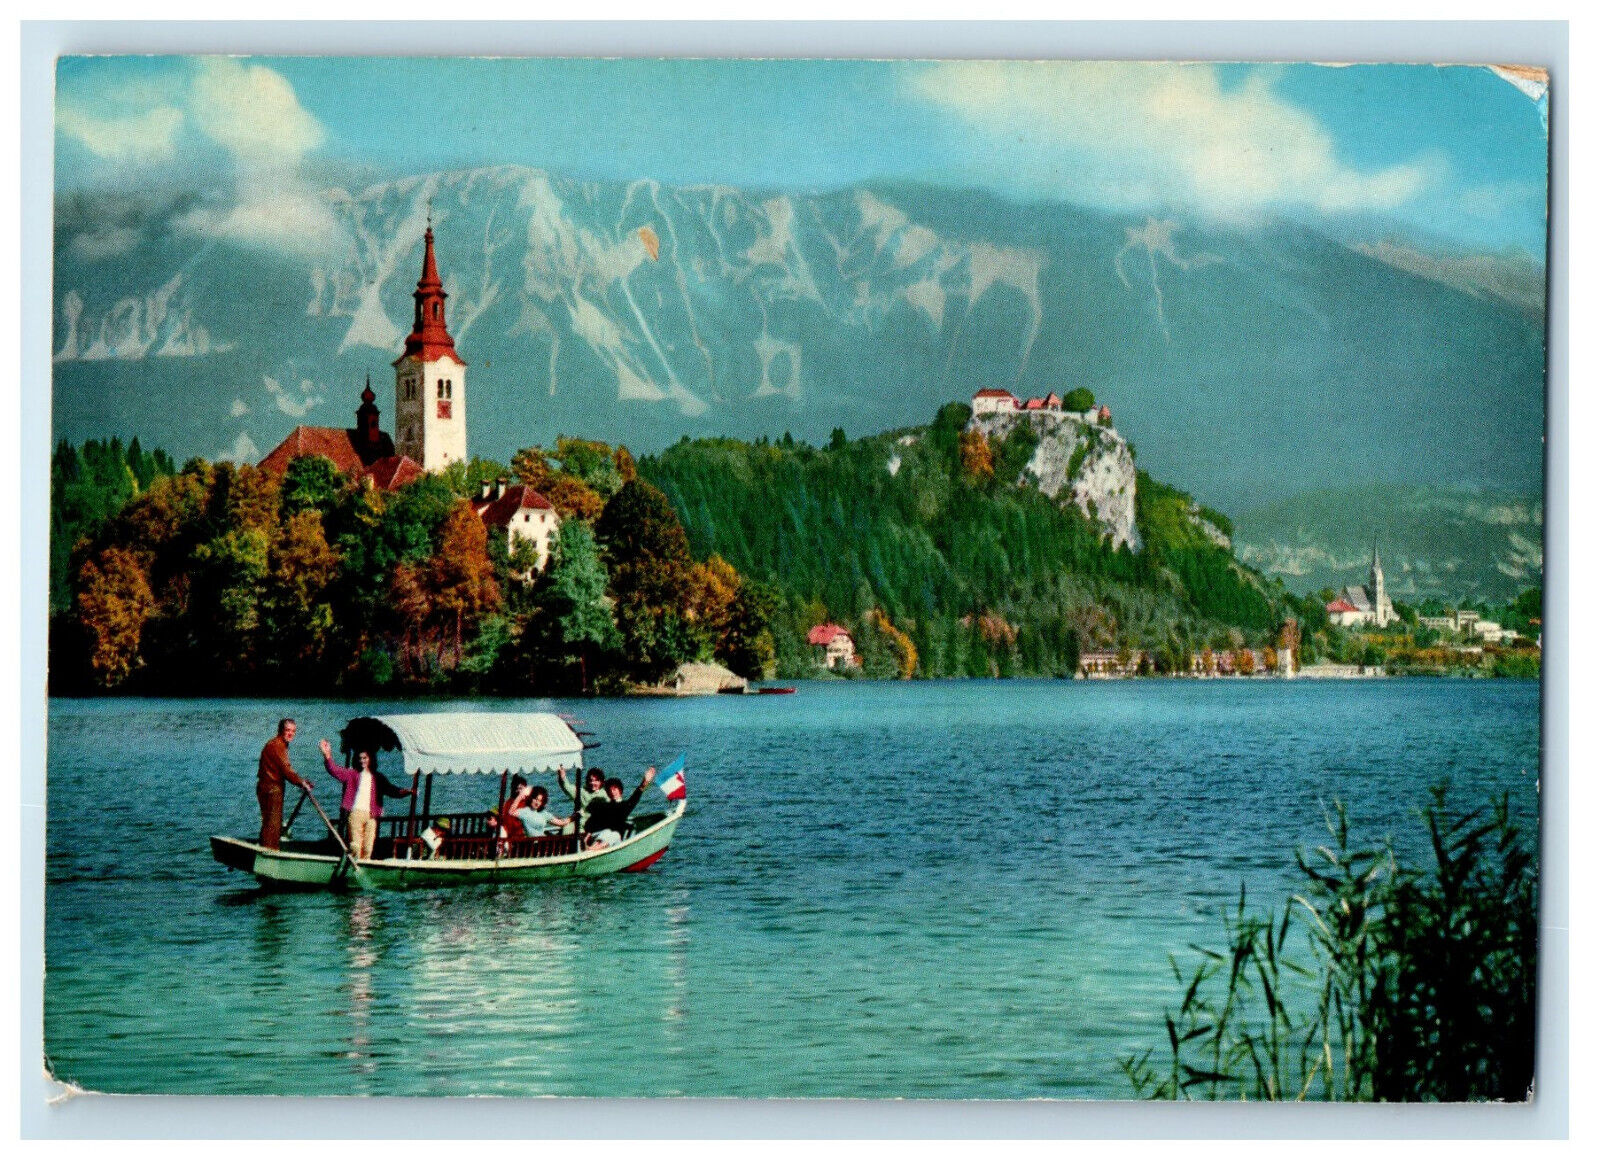 1969 View on the Lake, Boat Sailing, Mountain, Buildings BLED Slovenia Postcard